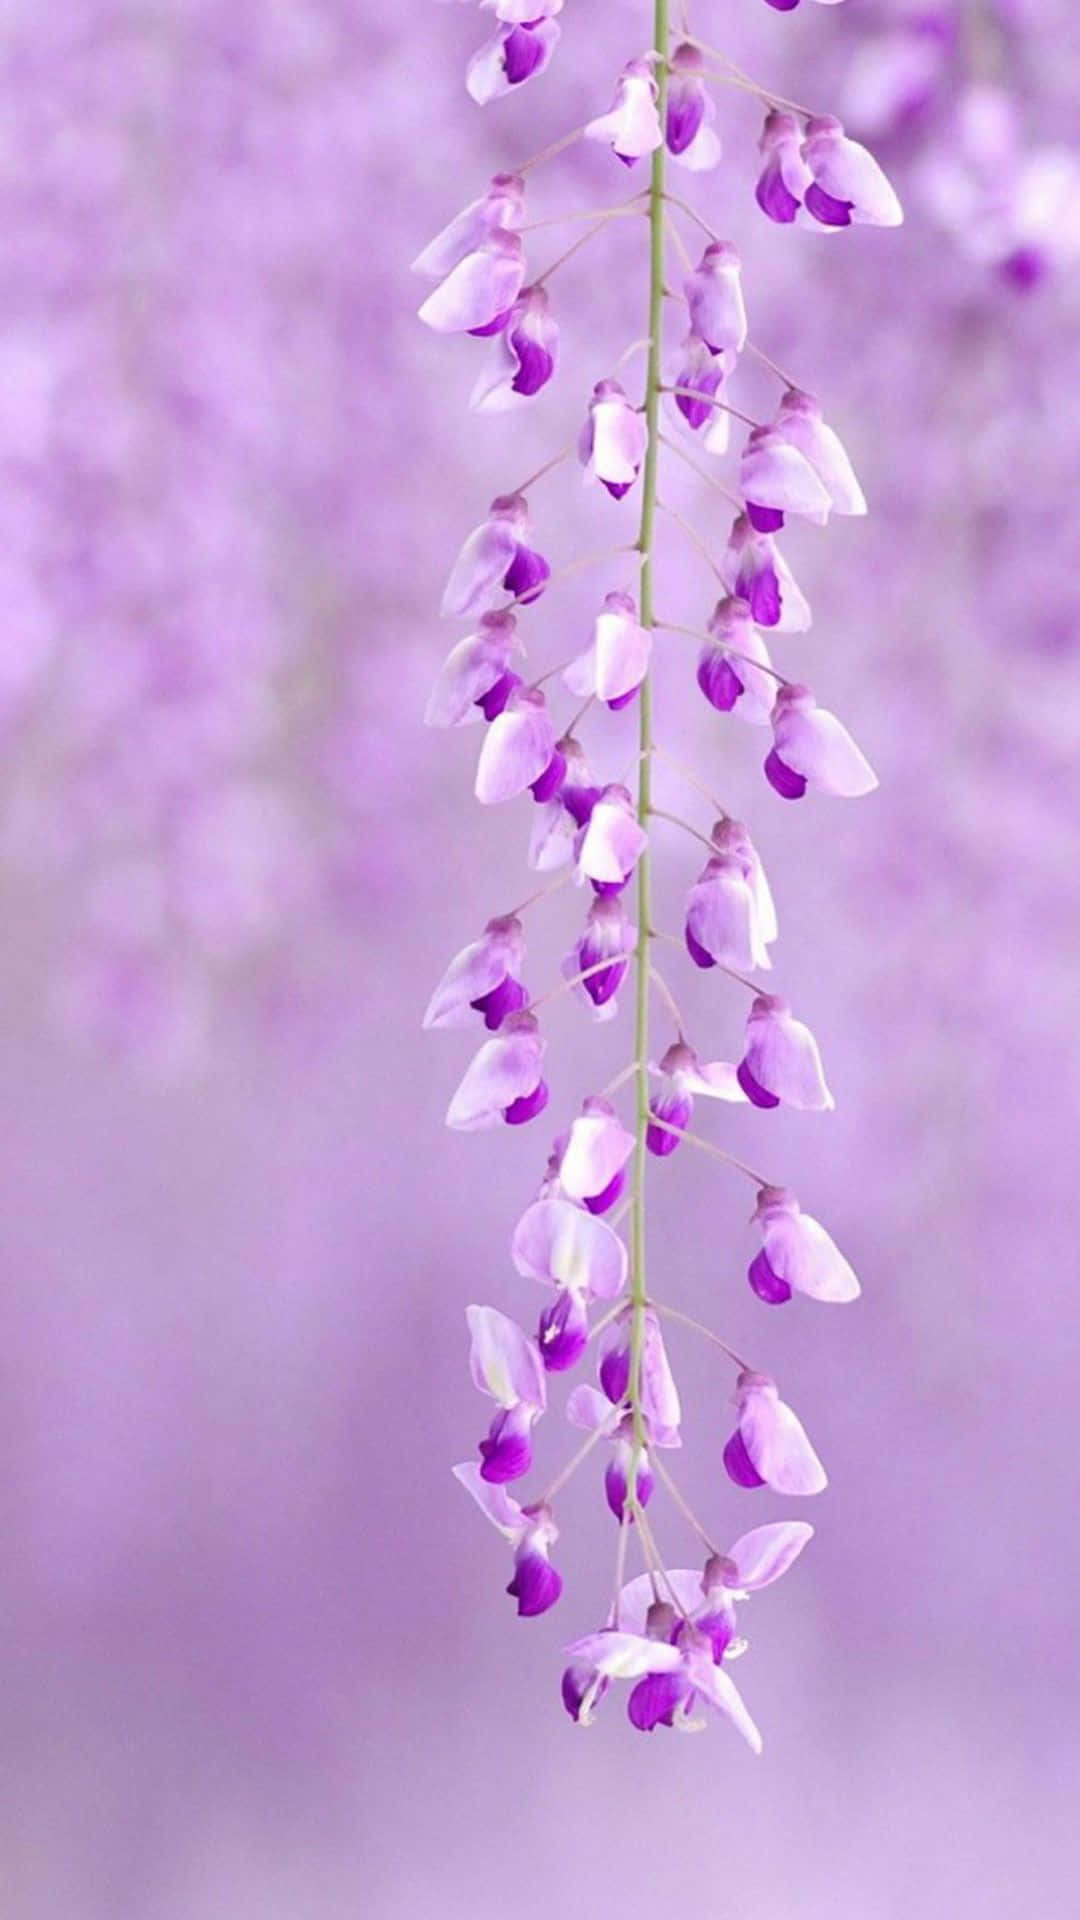 A Purple Flower Hanging From A Branch